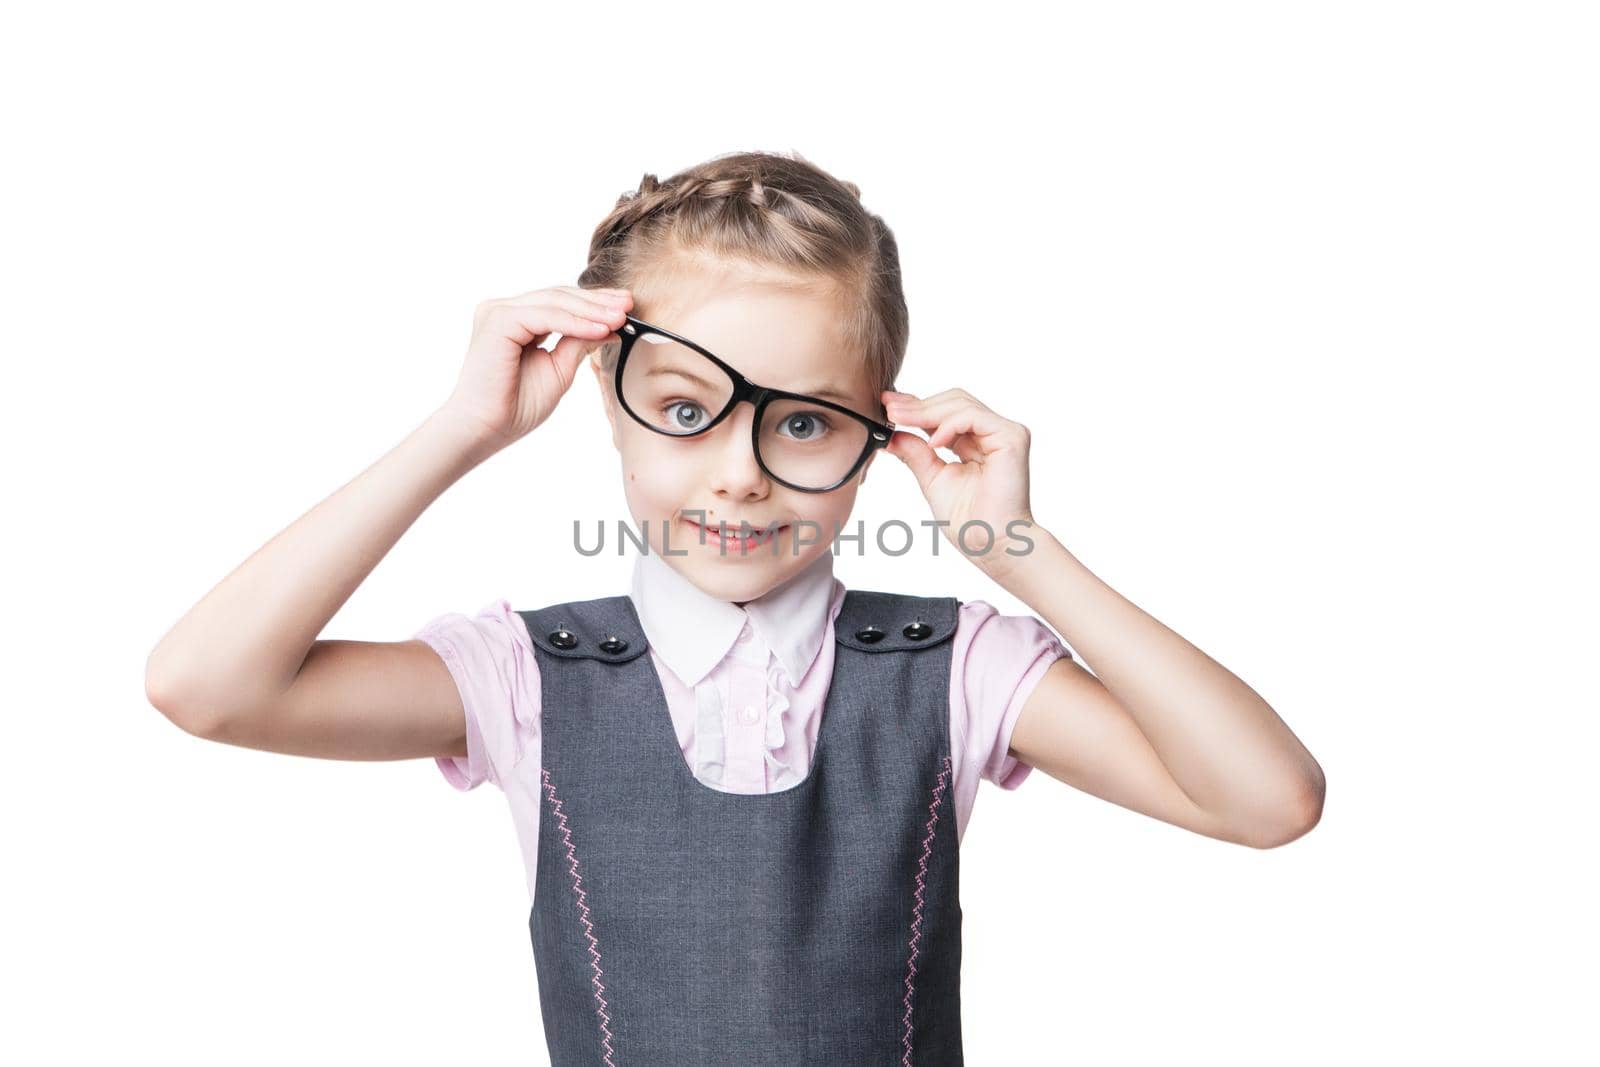 Portrait of a funny little girl on school uniform and glasses making faces